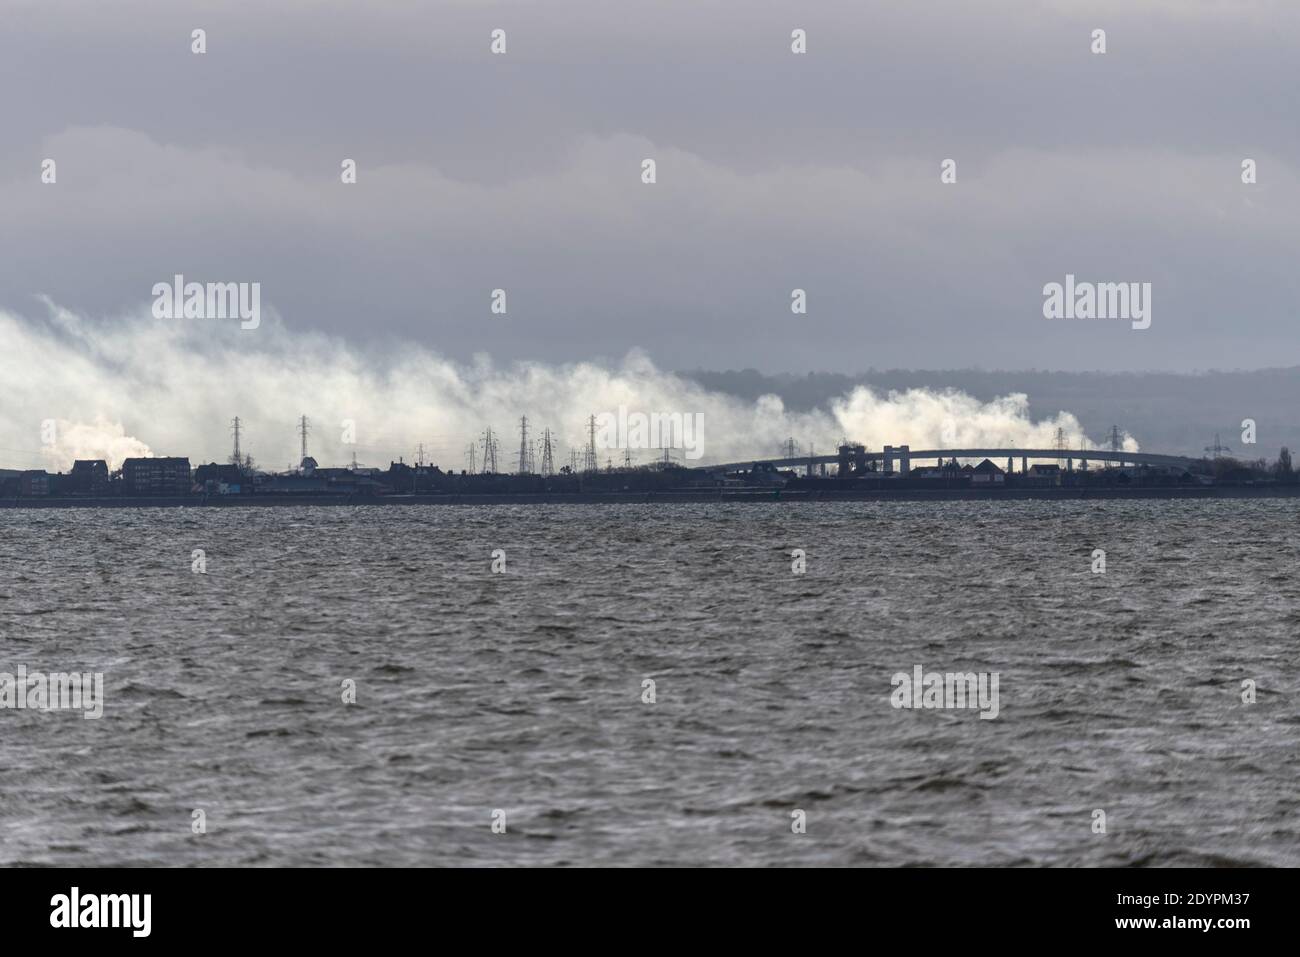 View from Southend on Sea, Essex, UK, across the Thames Estuary to Kent, with Sheppey Crossing, Sheerness and Minster visible. Power station steam Stock Photo